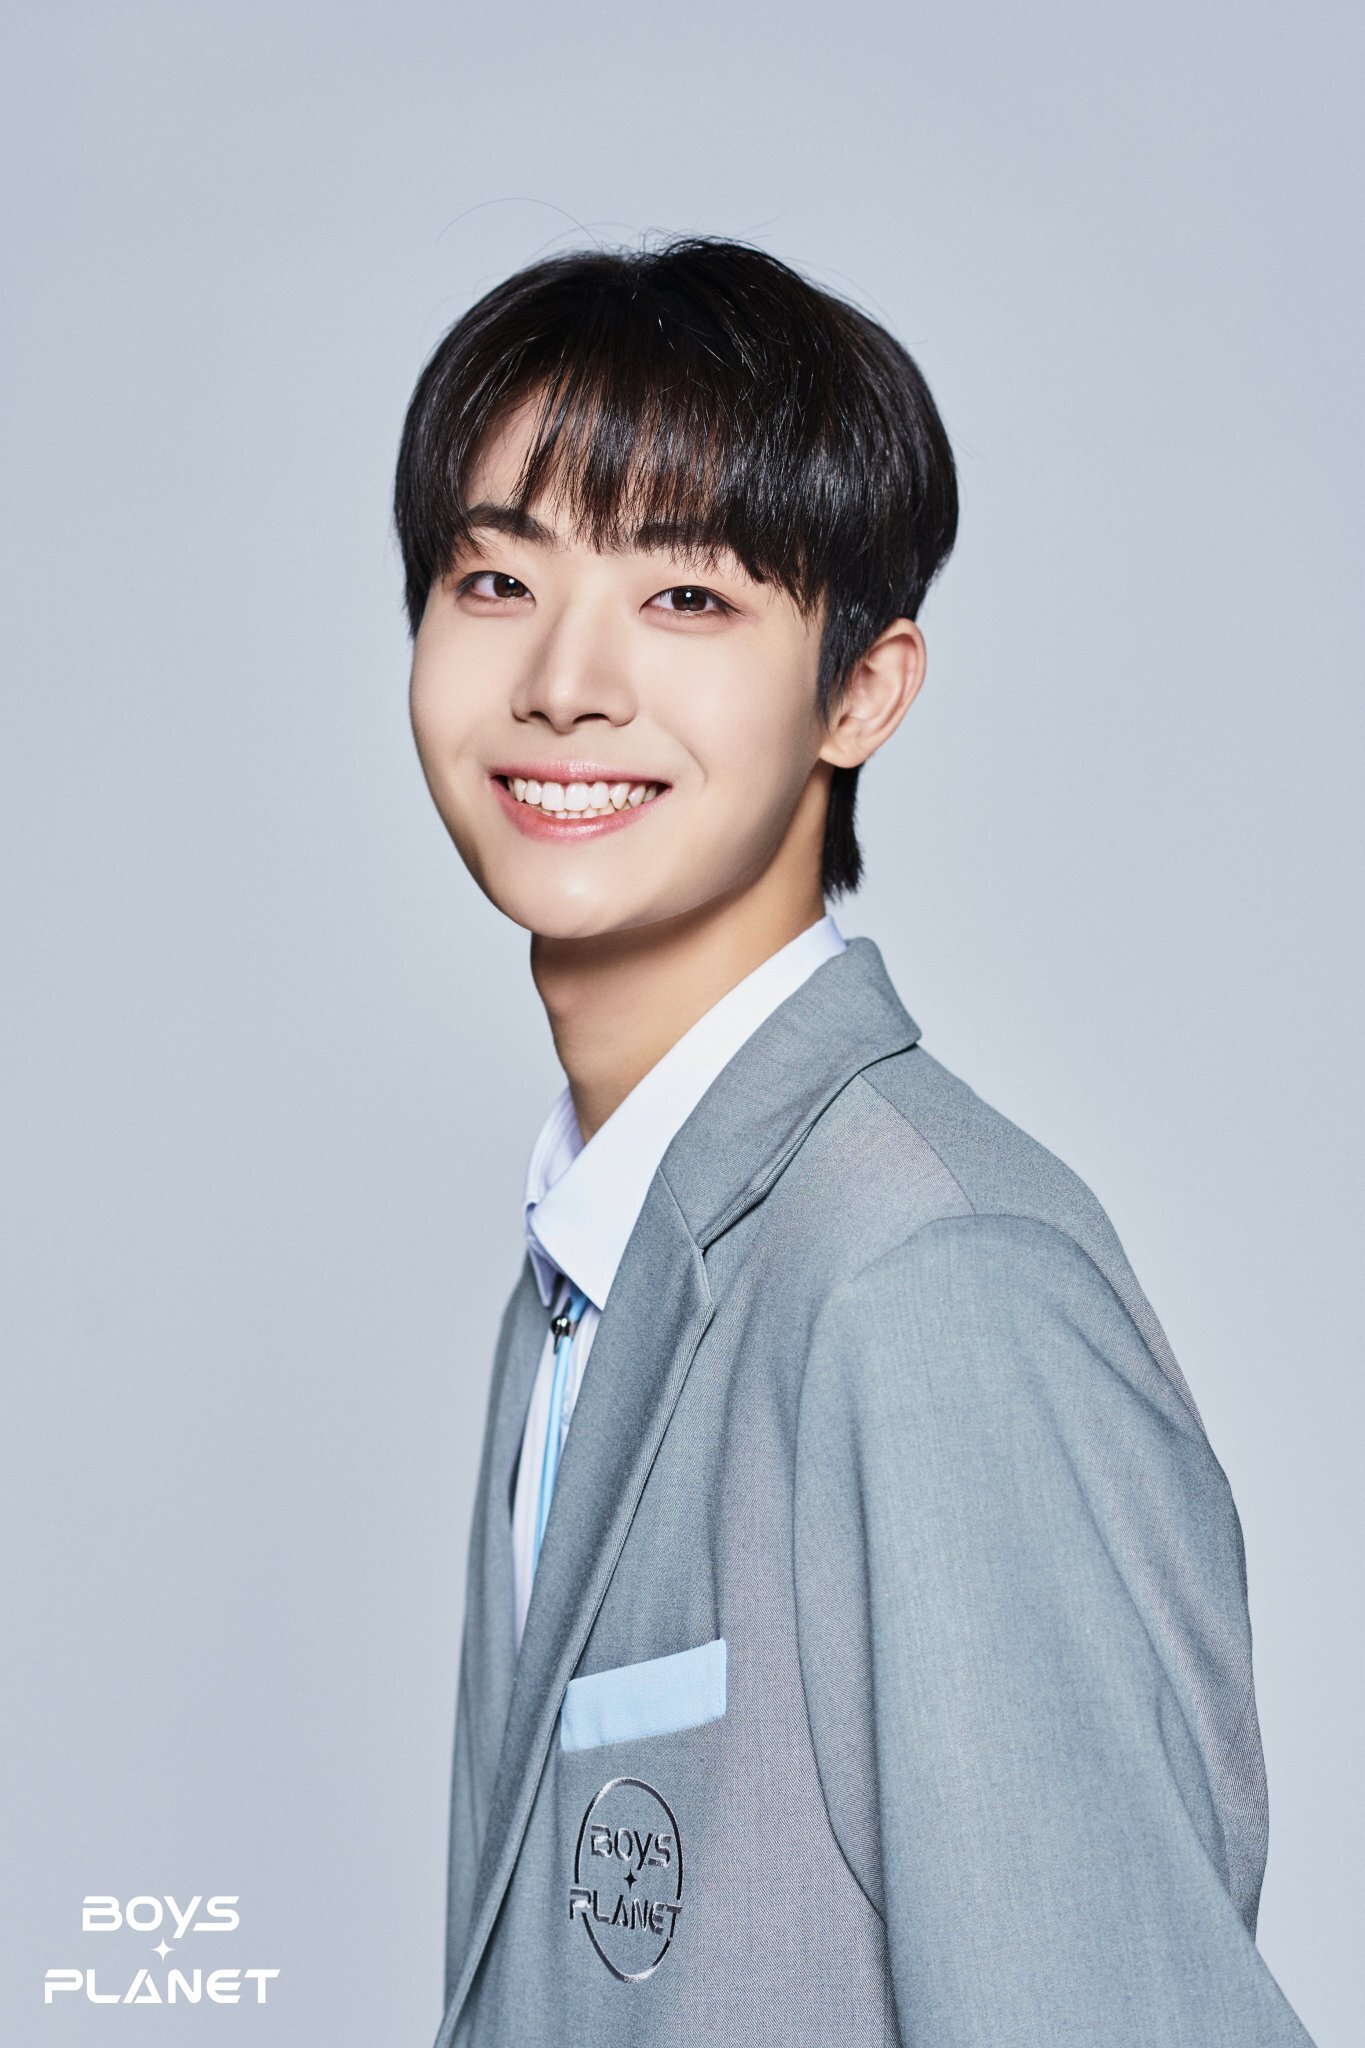 Boys Planet 2023 profile - K group - Jung Hojin | kpopping